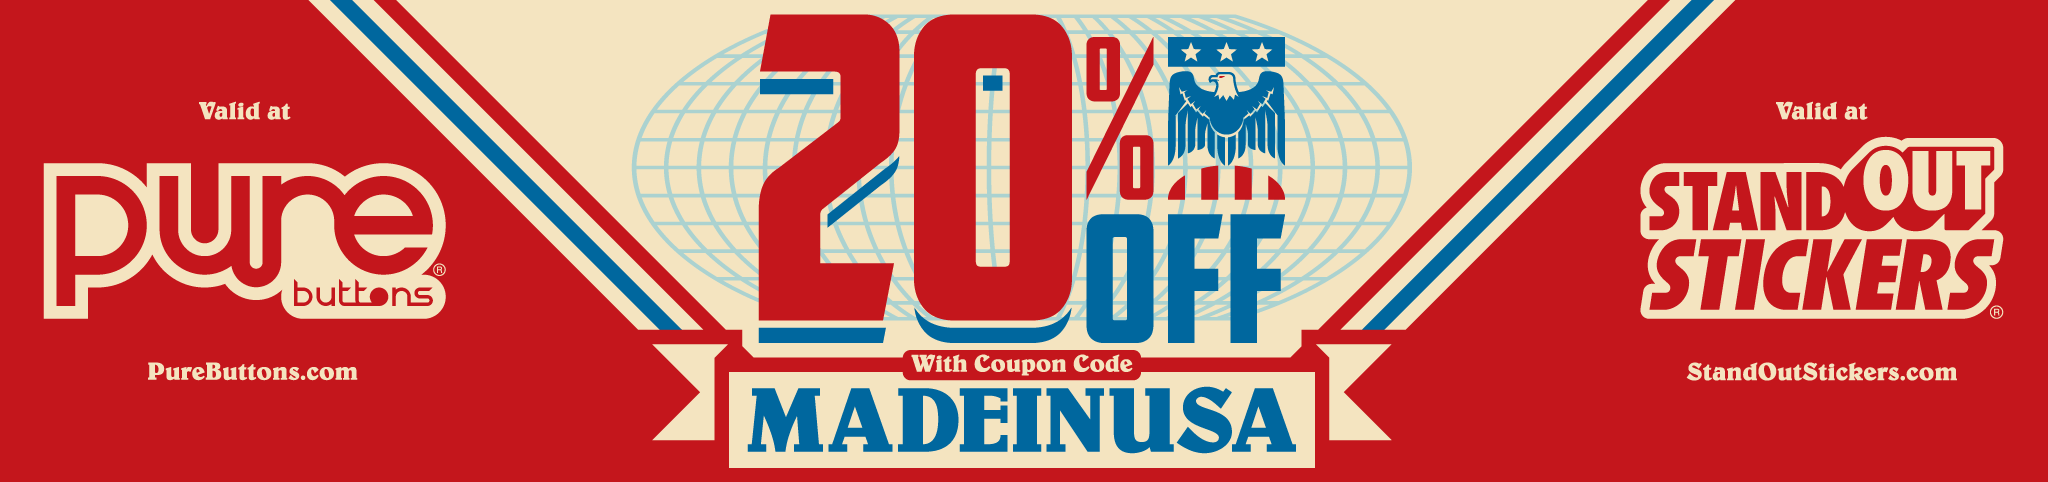 20% OFF with code MADEINUSA at PureButtons.com and StandOutStickers.com